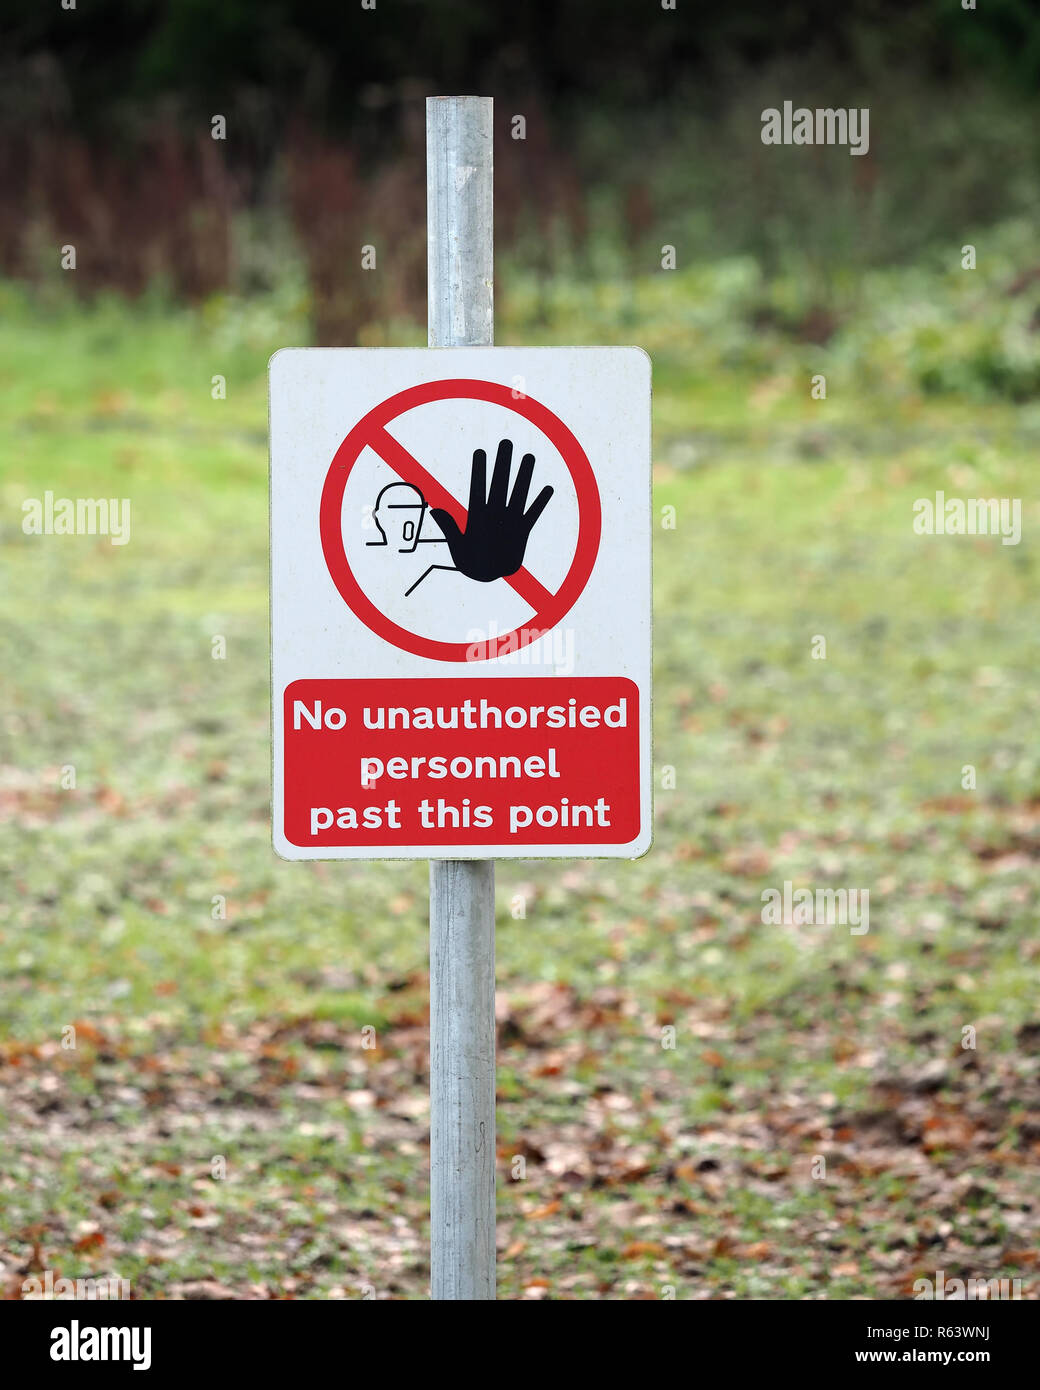 No unauthorised personnel past this point warning sign Stock Photo